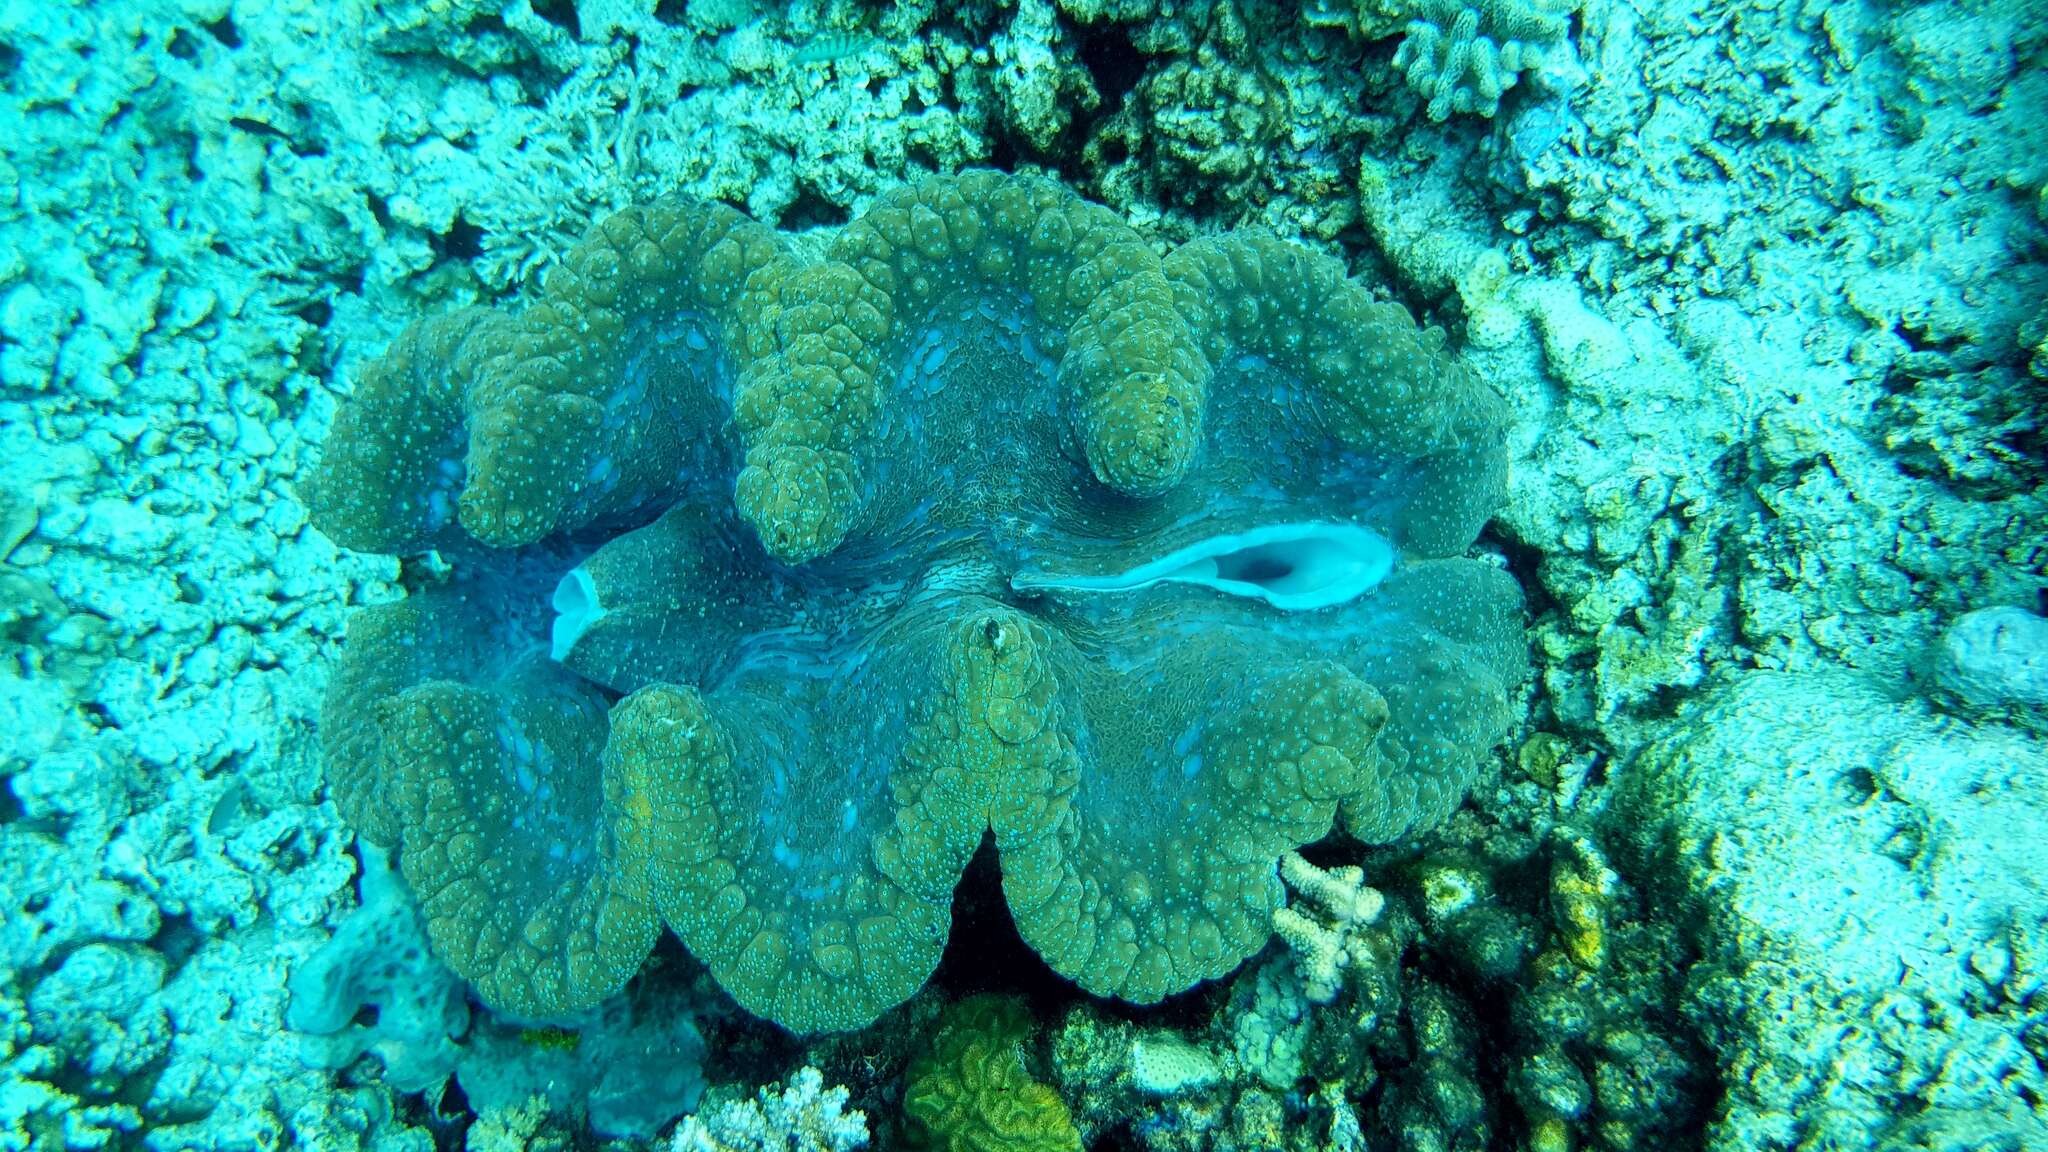 Image of Giant Clam